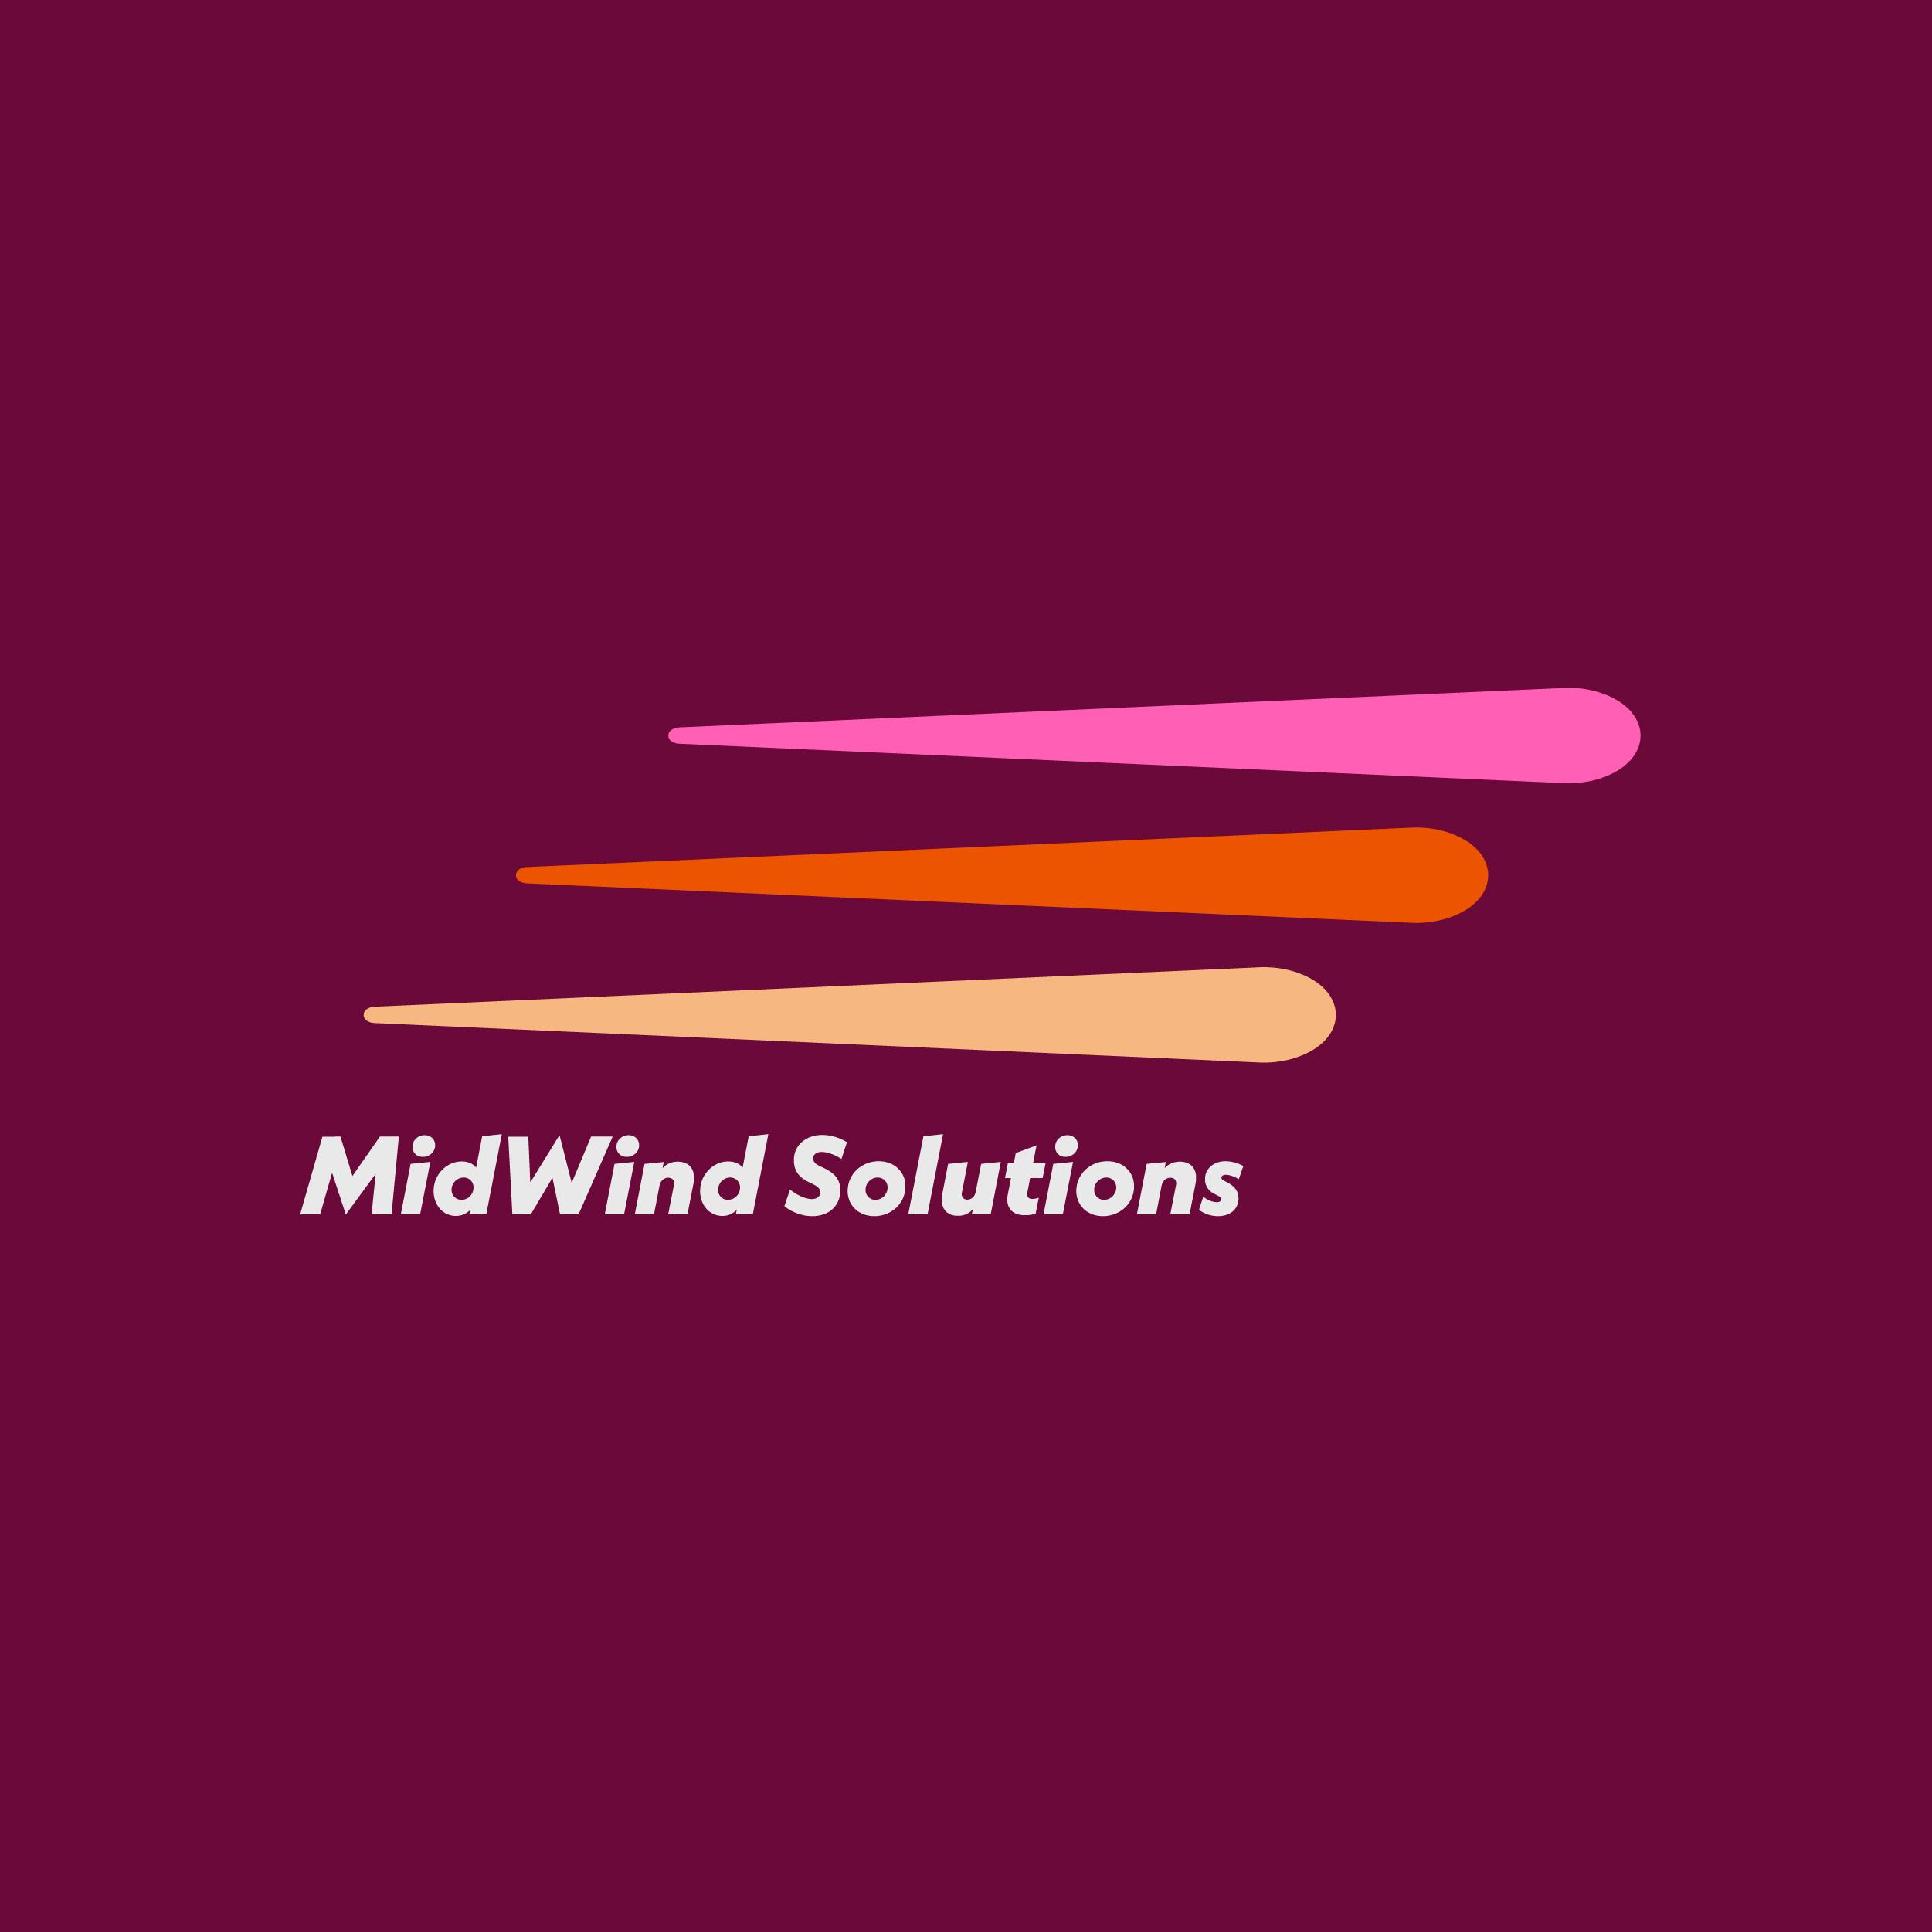 Midwind Solutions